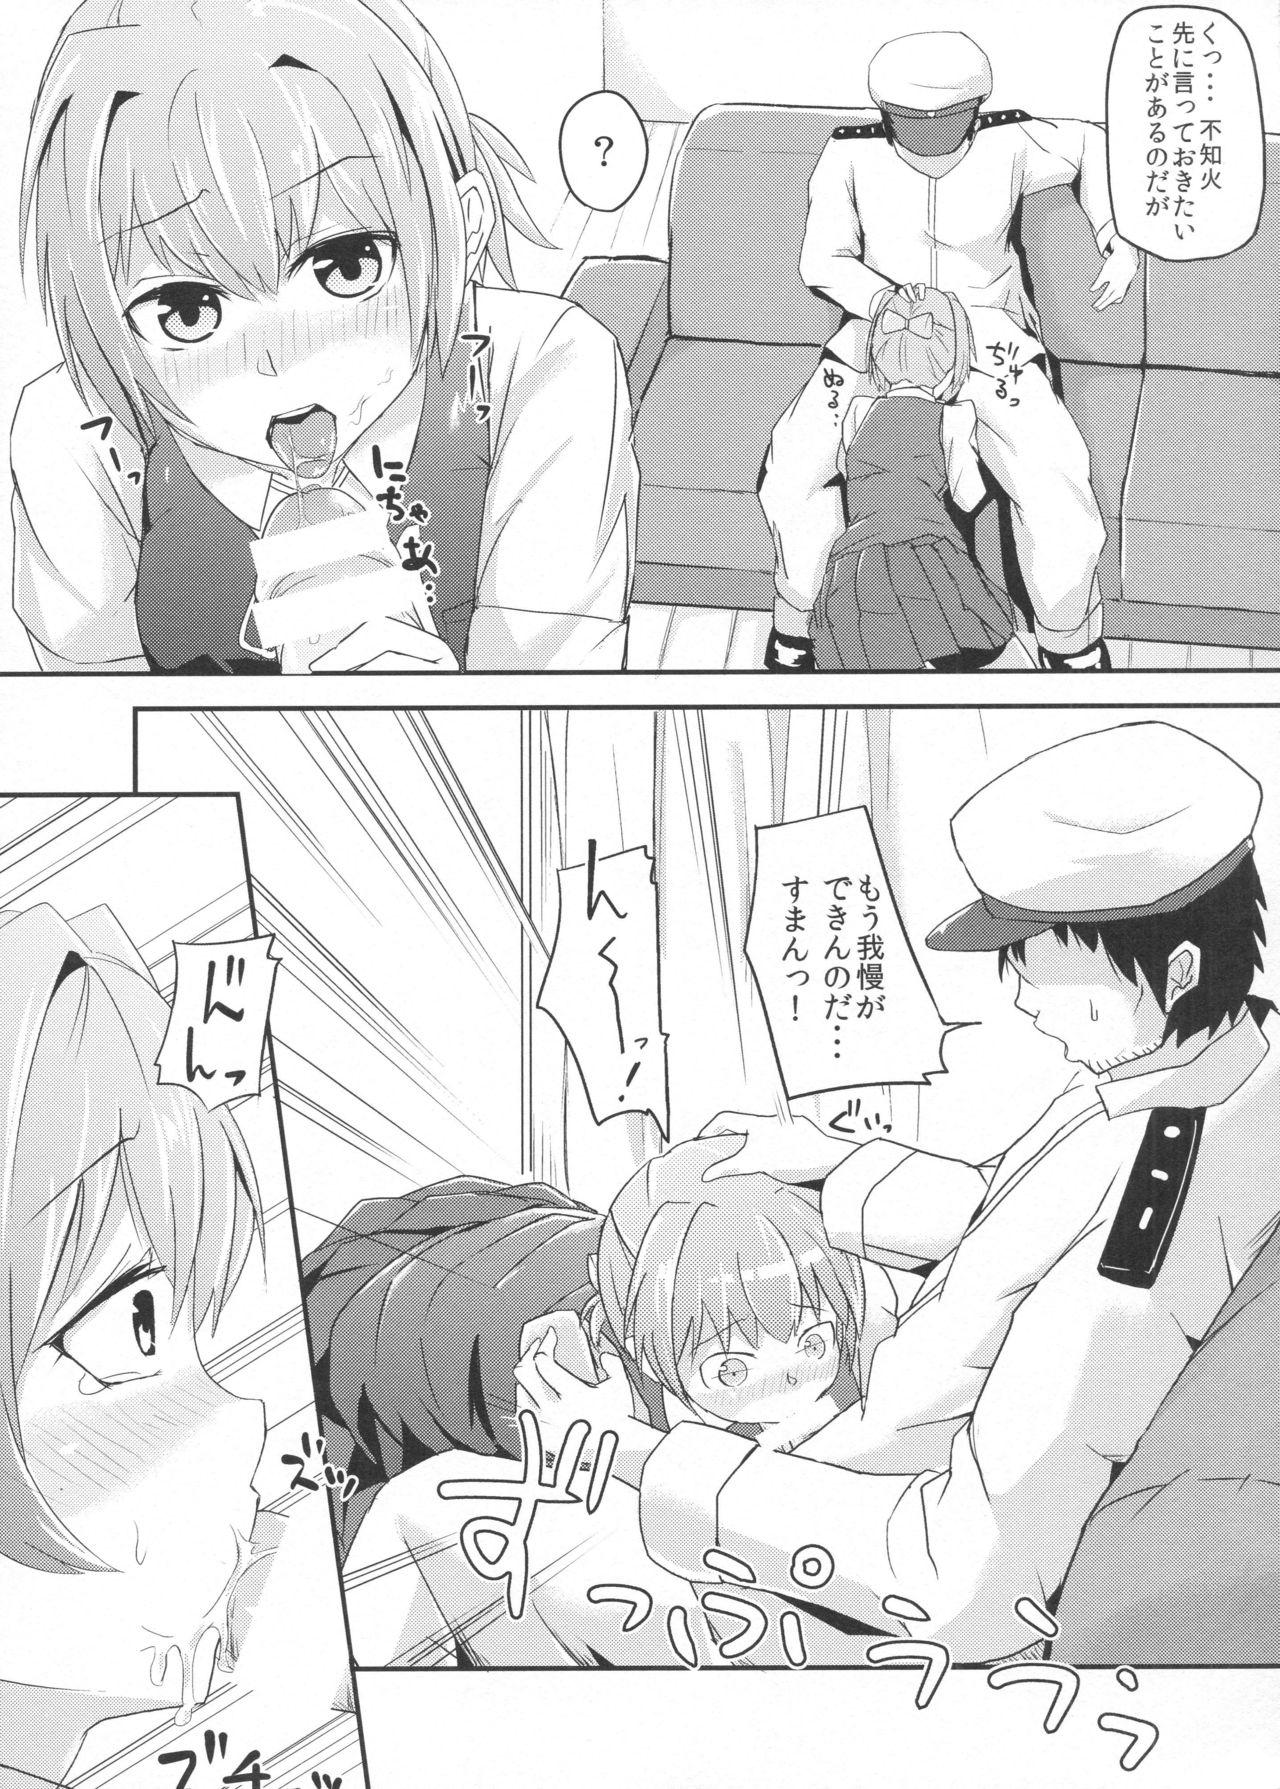 Tattoo Tsun to Dere Nui - Kantai collection Police - Page 10